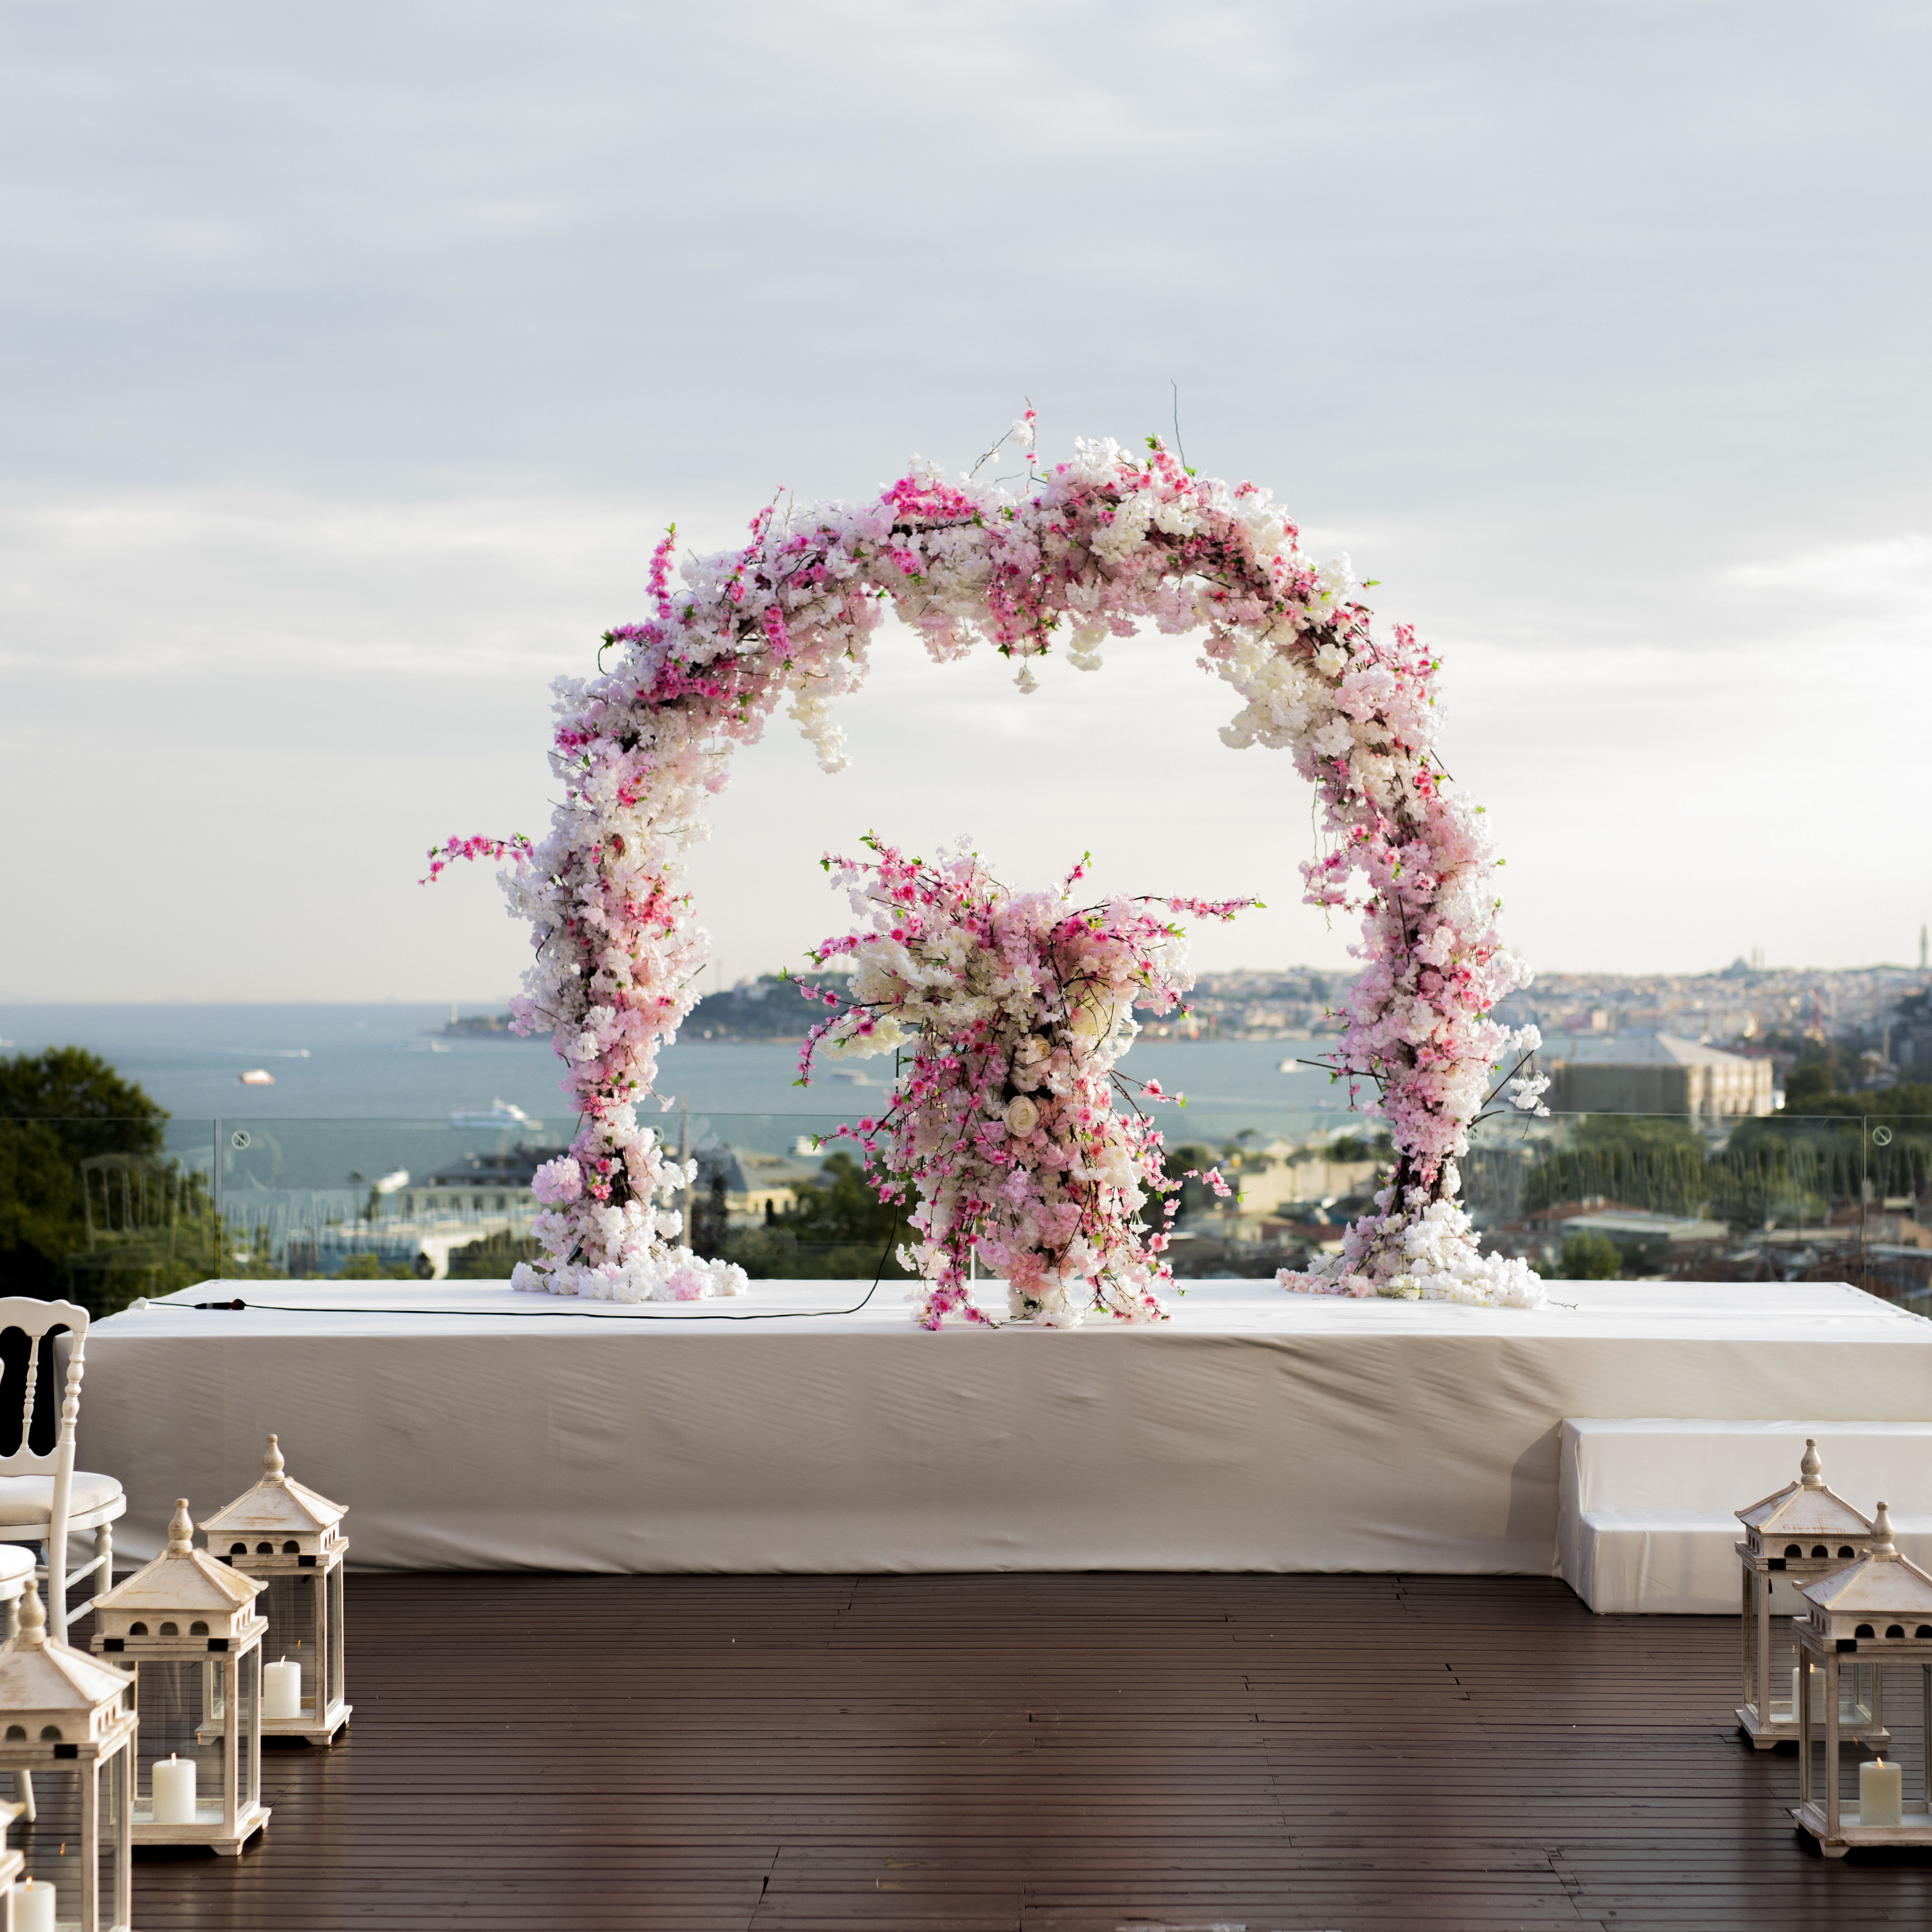 Wedding Celebration on a Terrace Overlooking the Water